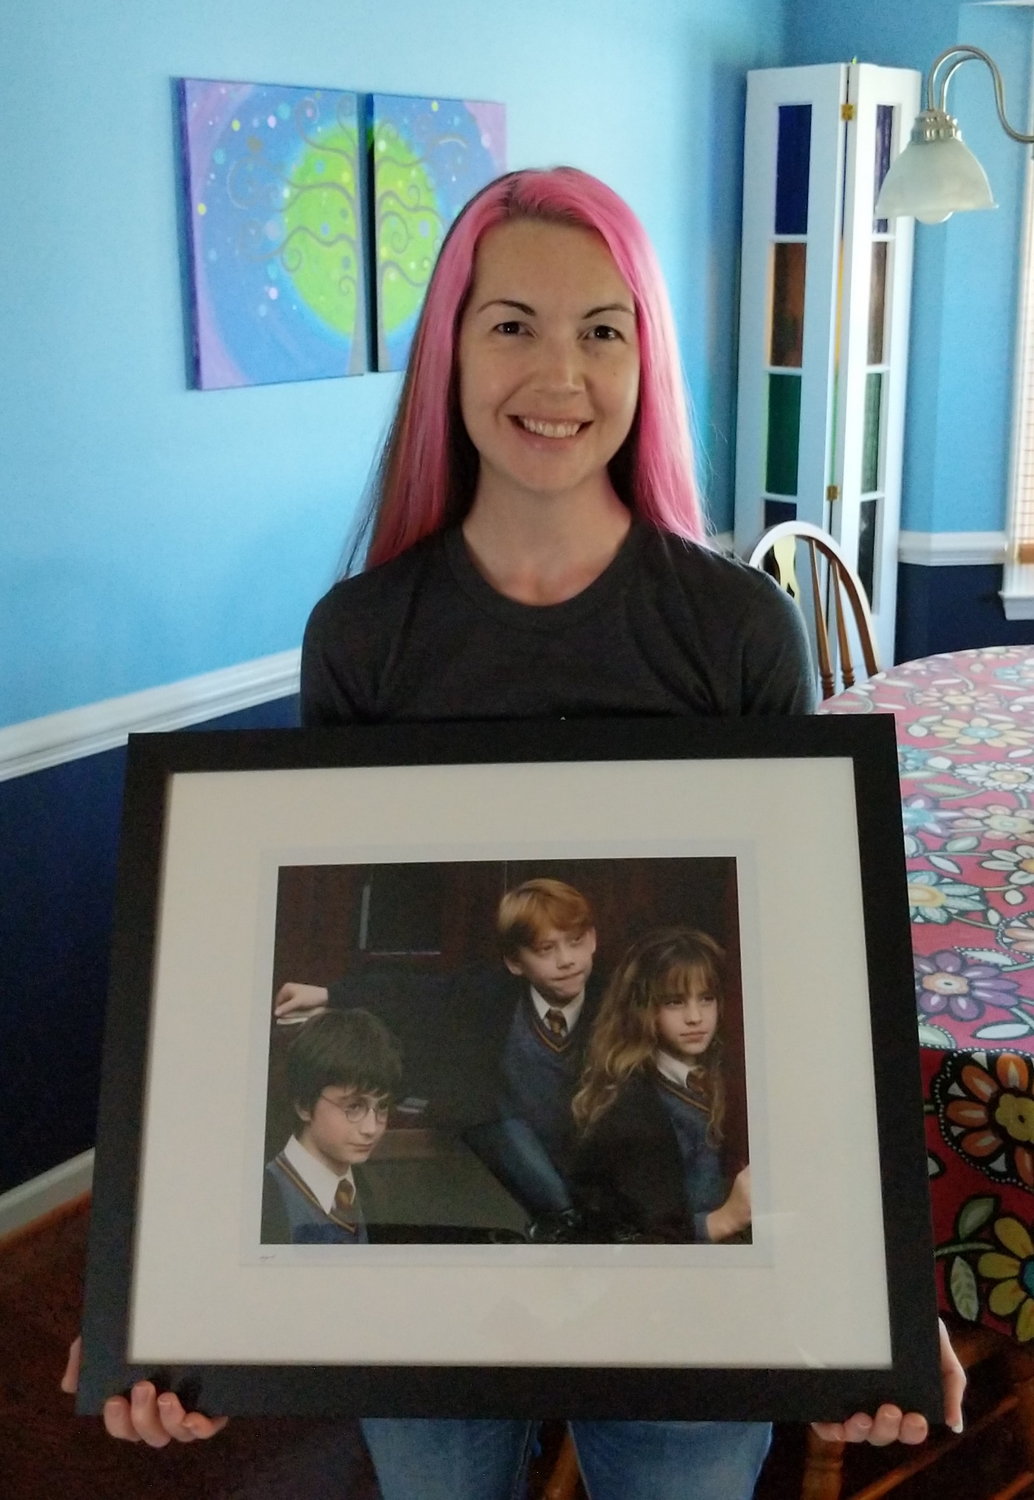 Me and my print – it was love at first sight!